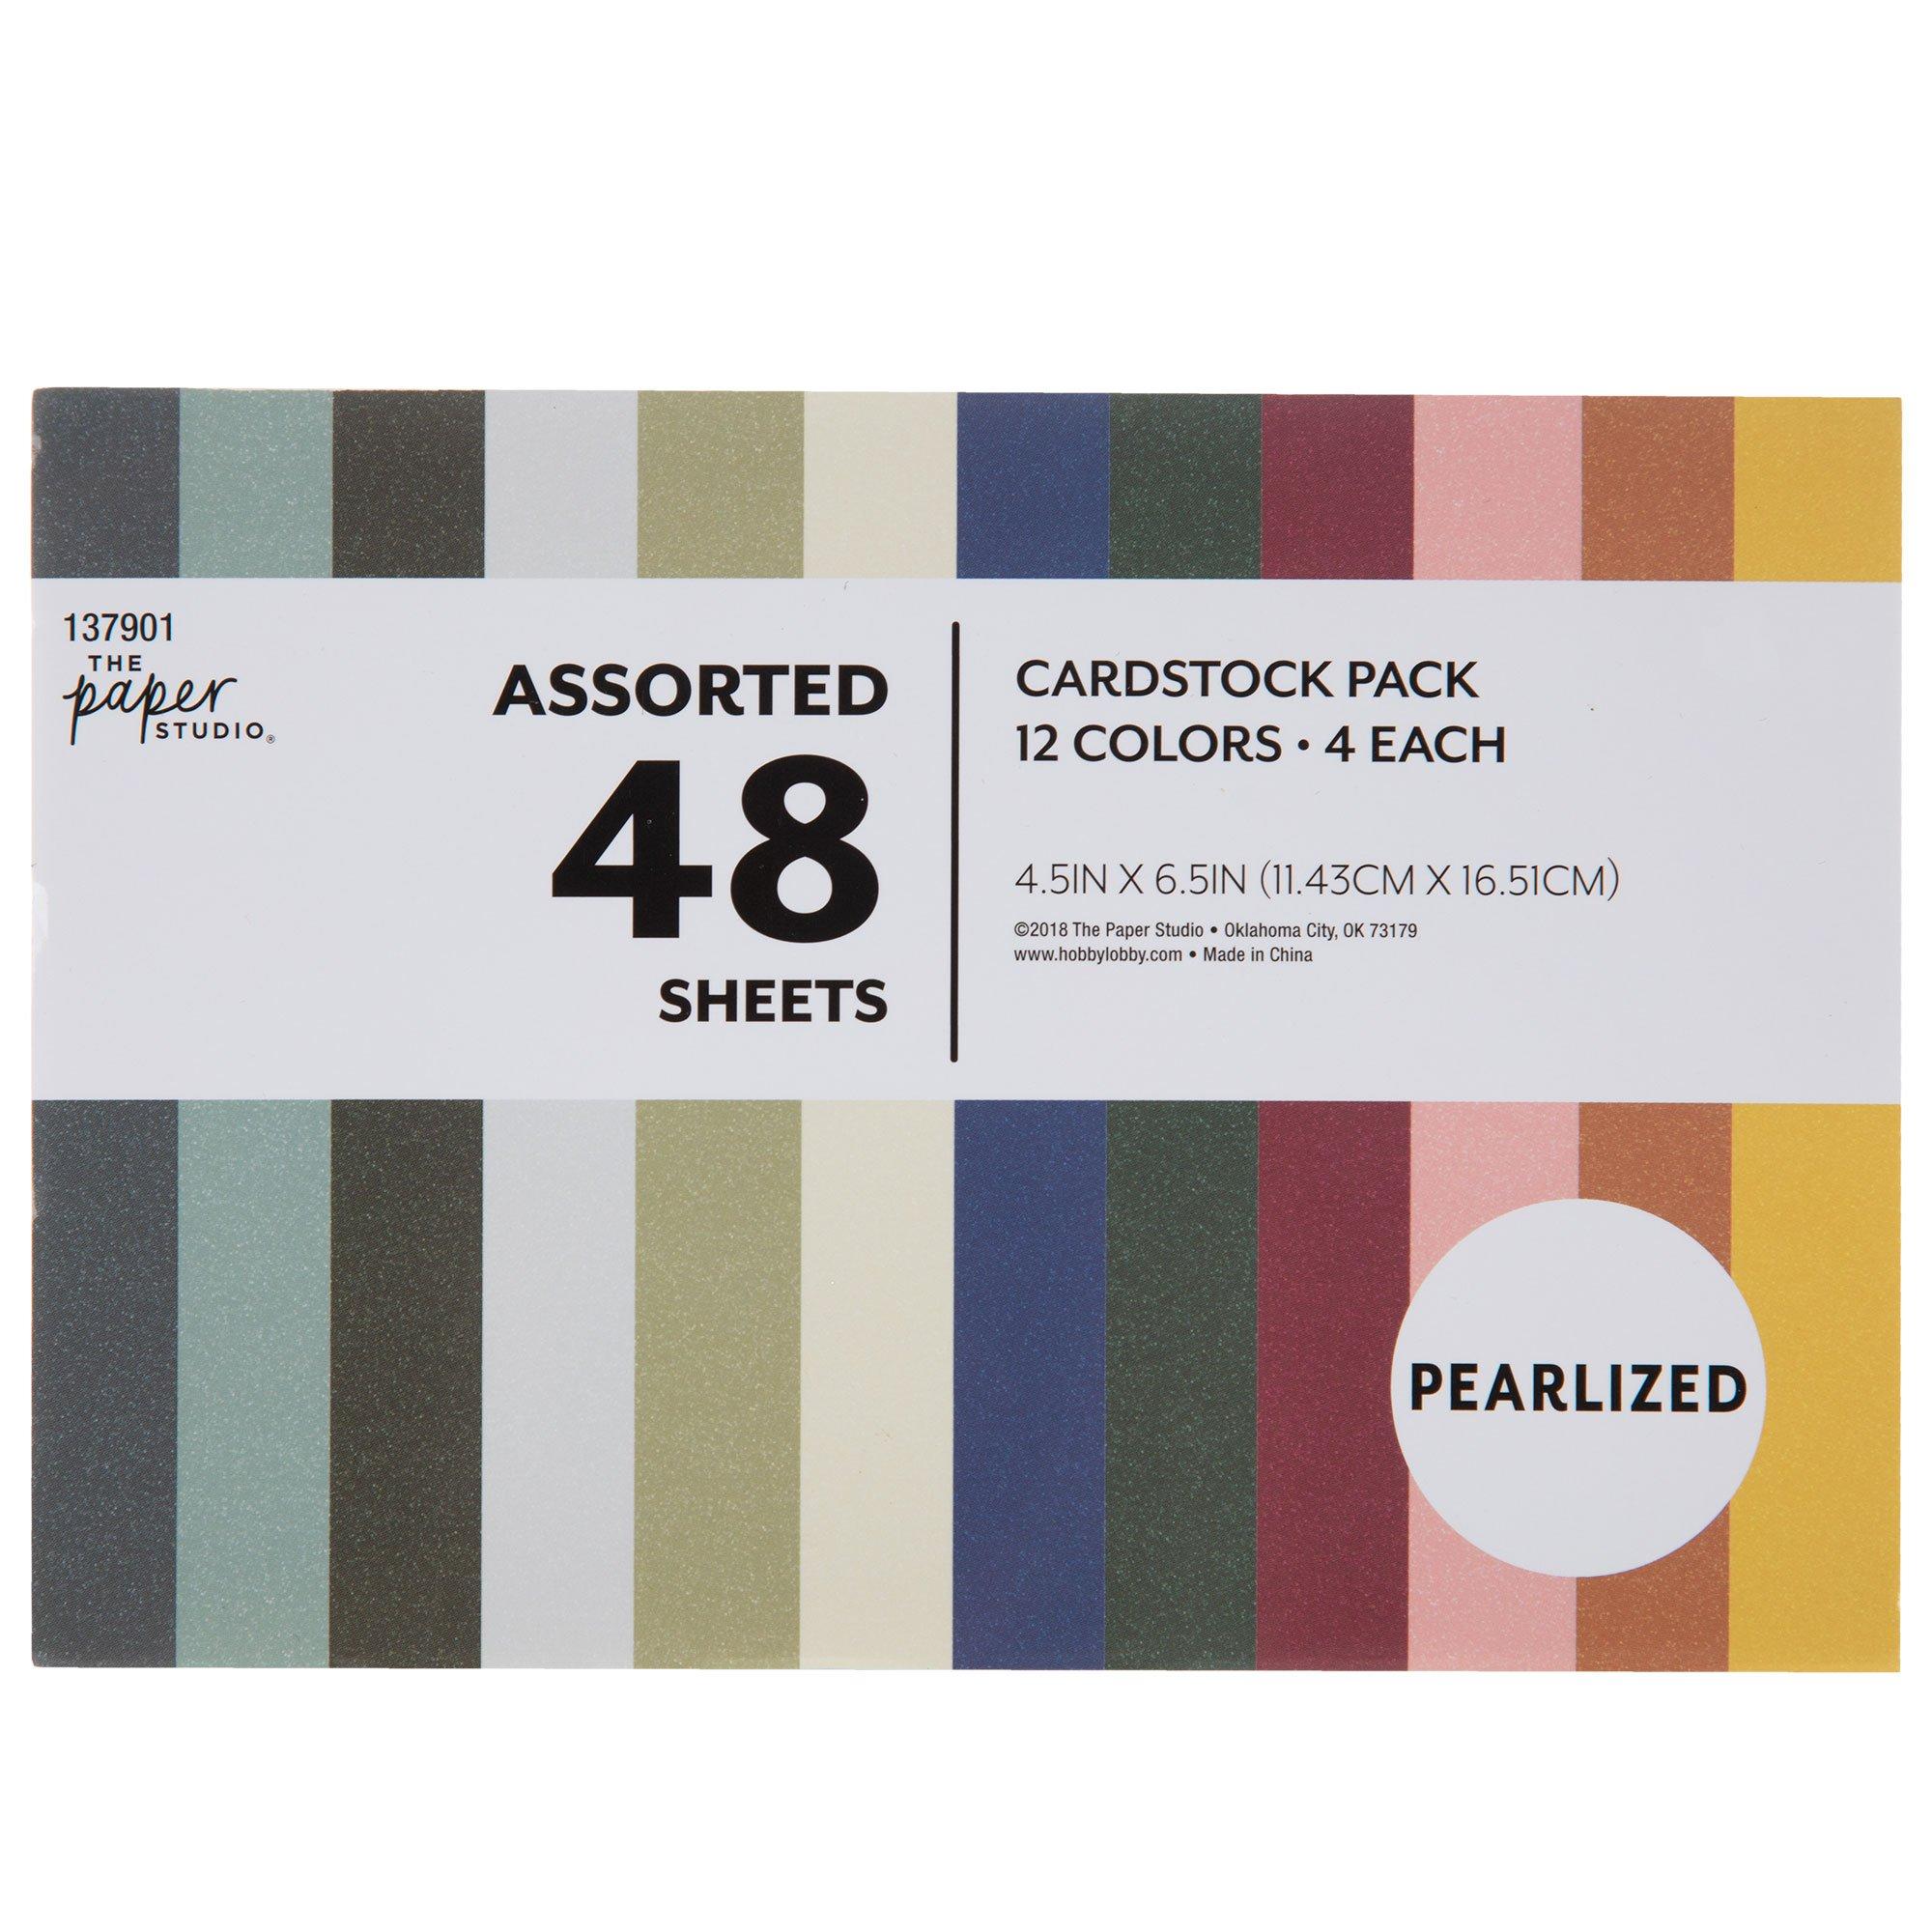 Bright Textured Cardstock Paper Pack, Hobby Lobby